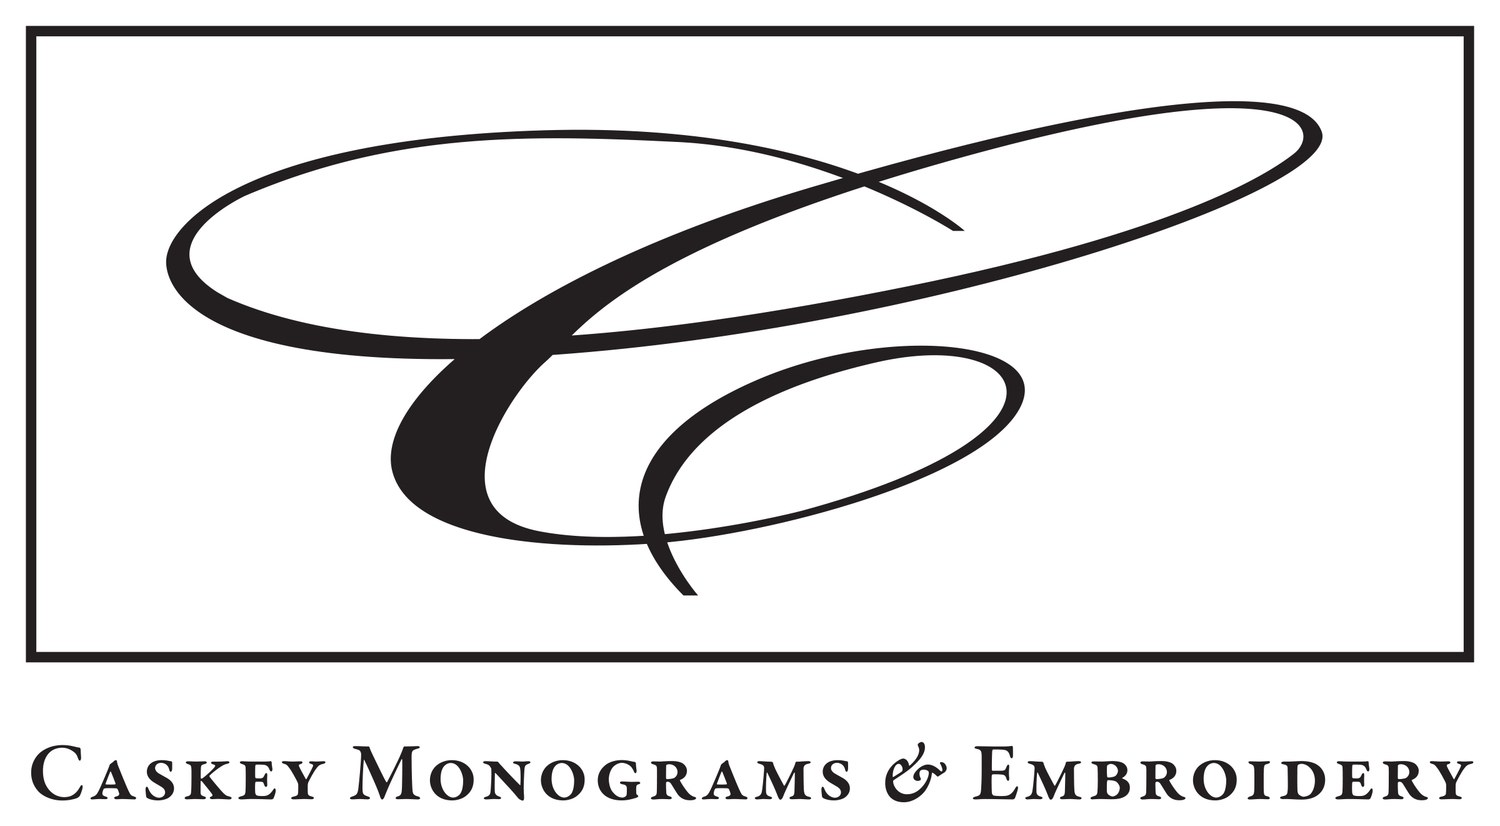 Caskey Monograms & Embroidery